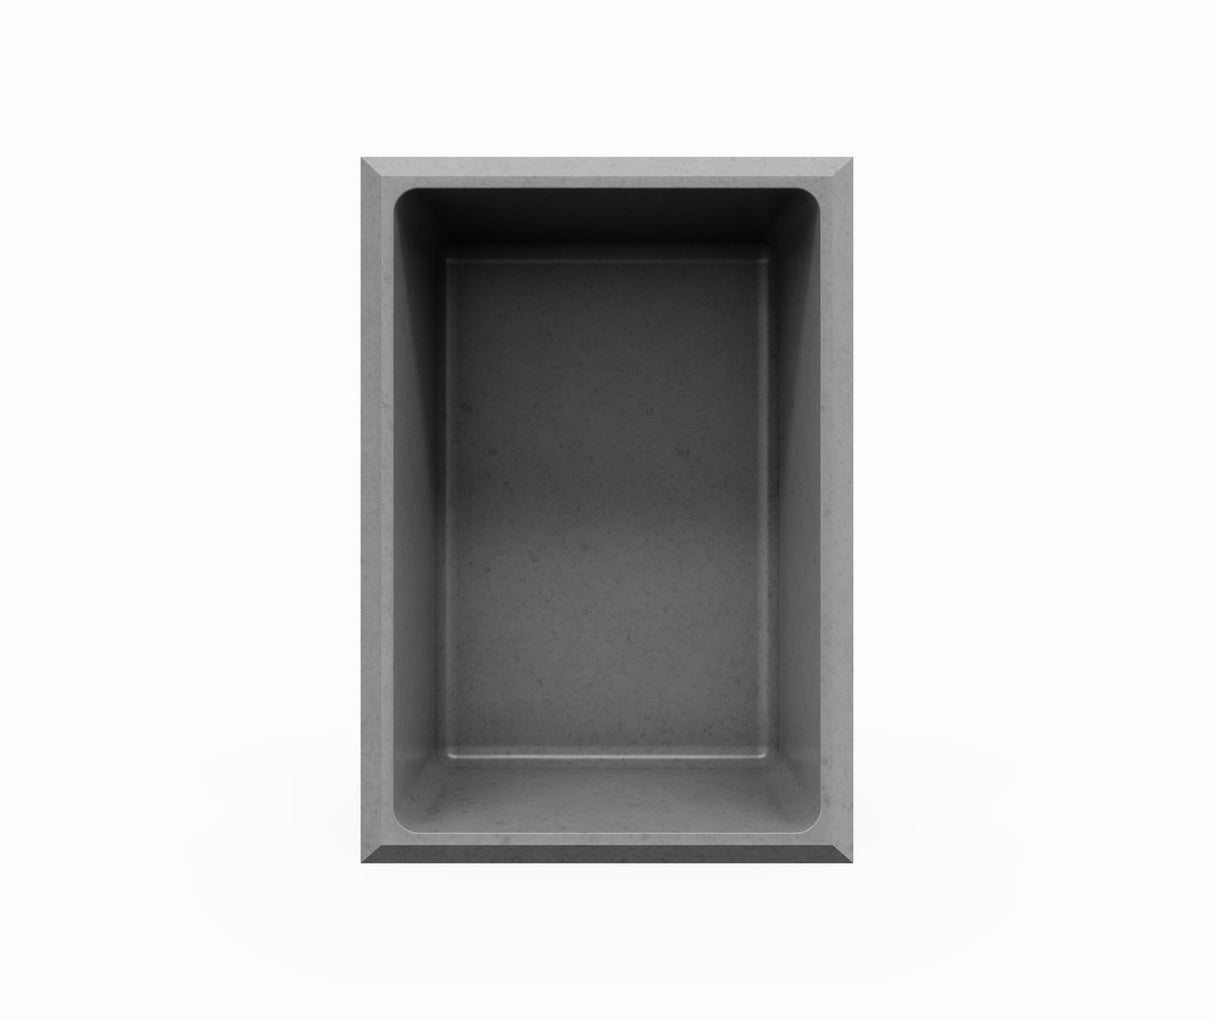 Swanstone AS-1075 Recessed Shelf in Ash Gray AS01075.203